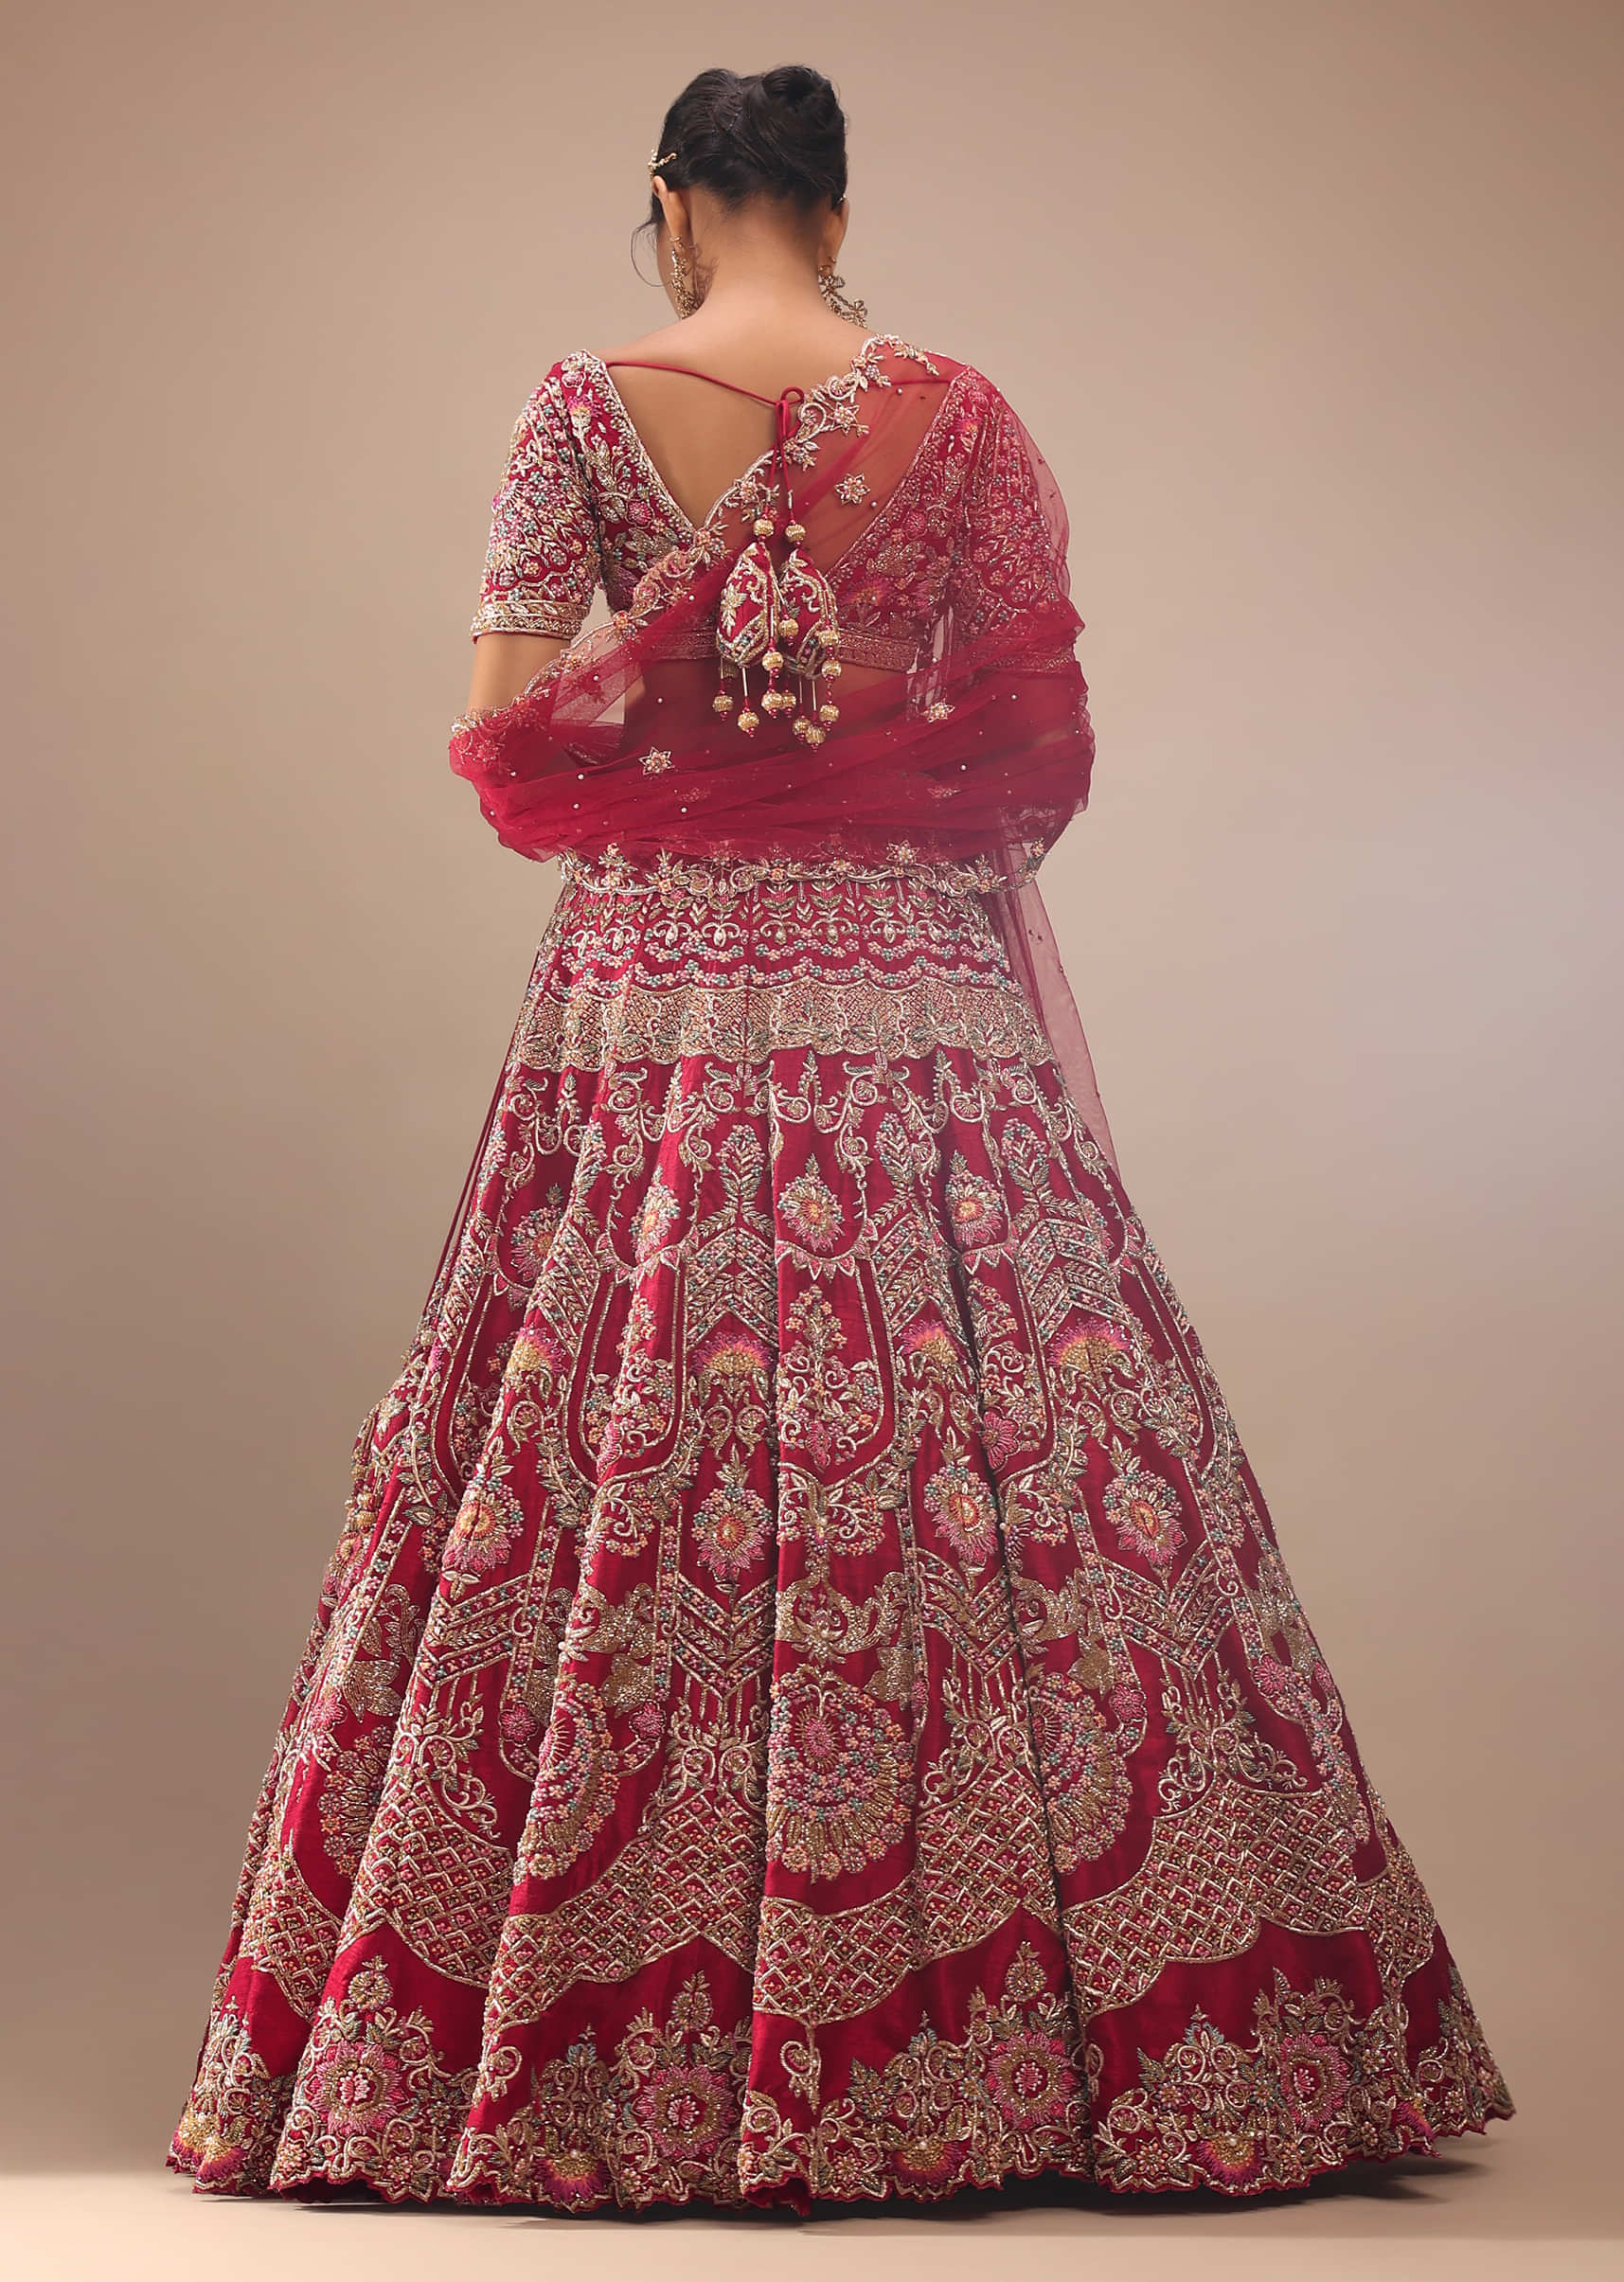 Red Lehenga In Royal Heritage Zardosi Embroidery, Crop Top With A V Neckline And Back Hooks Closure